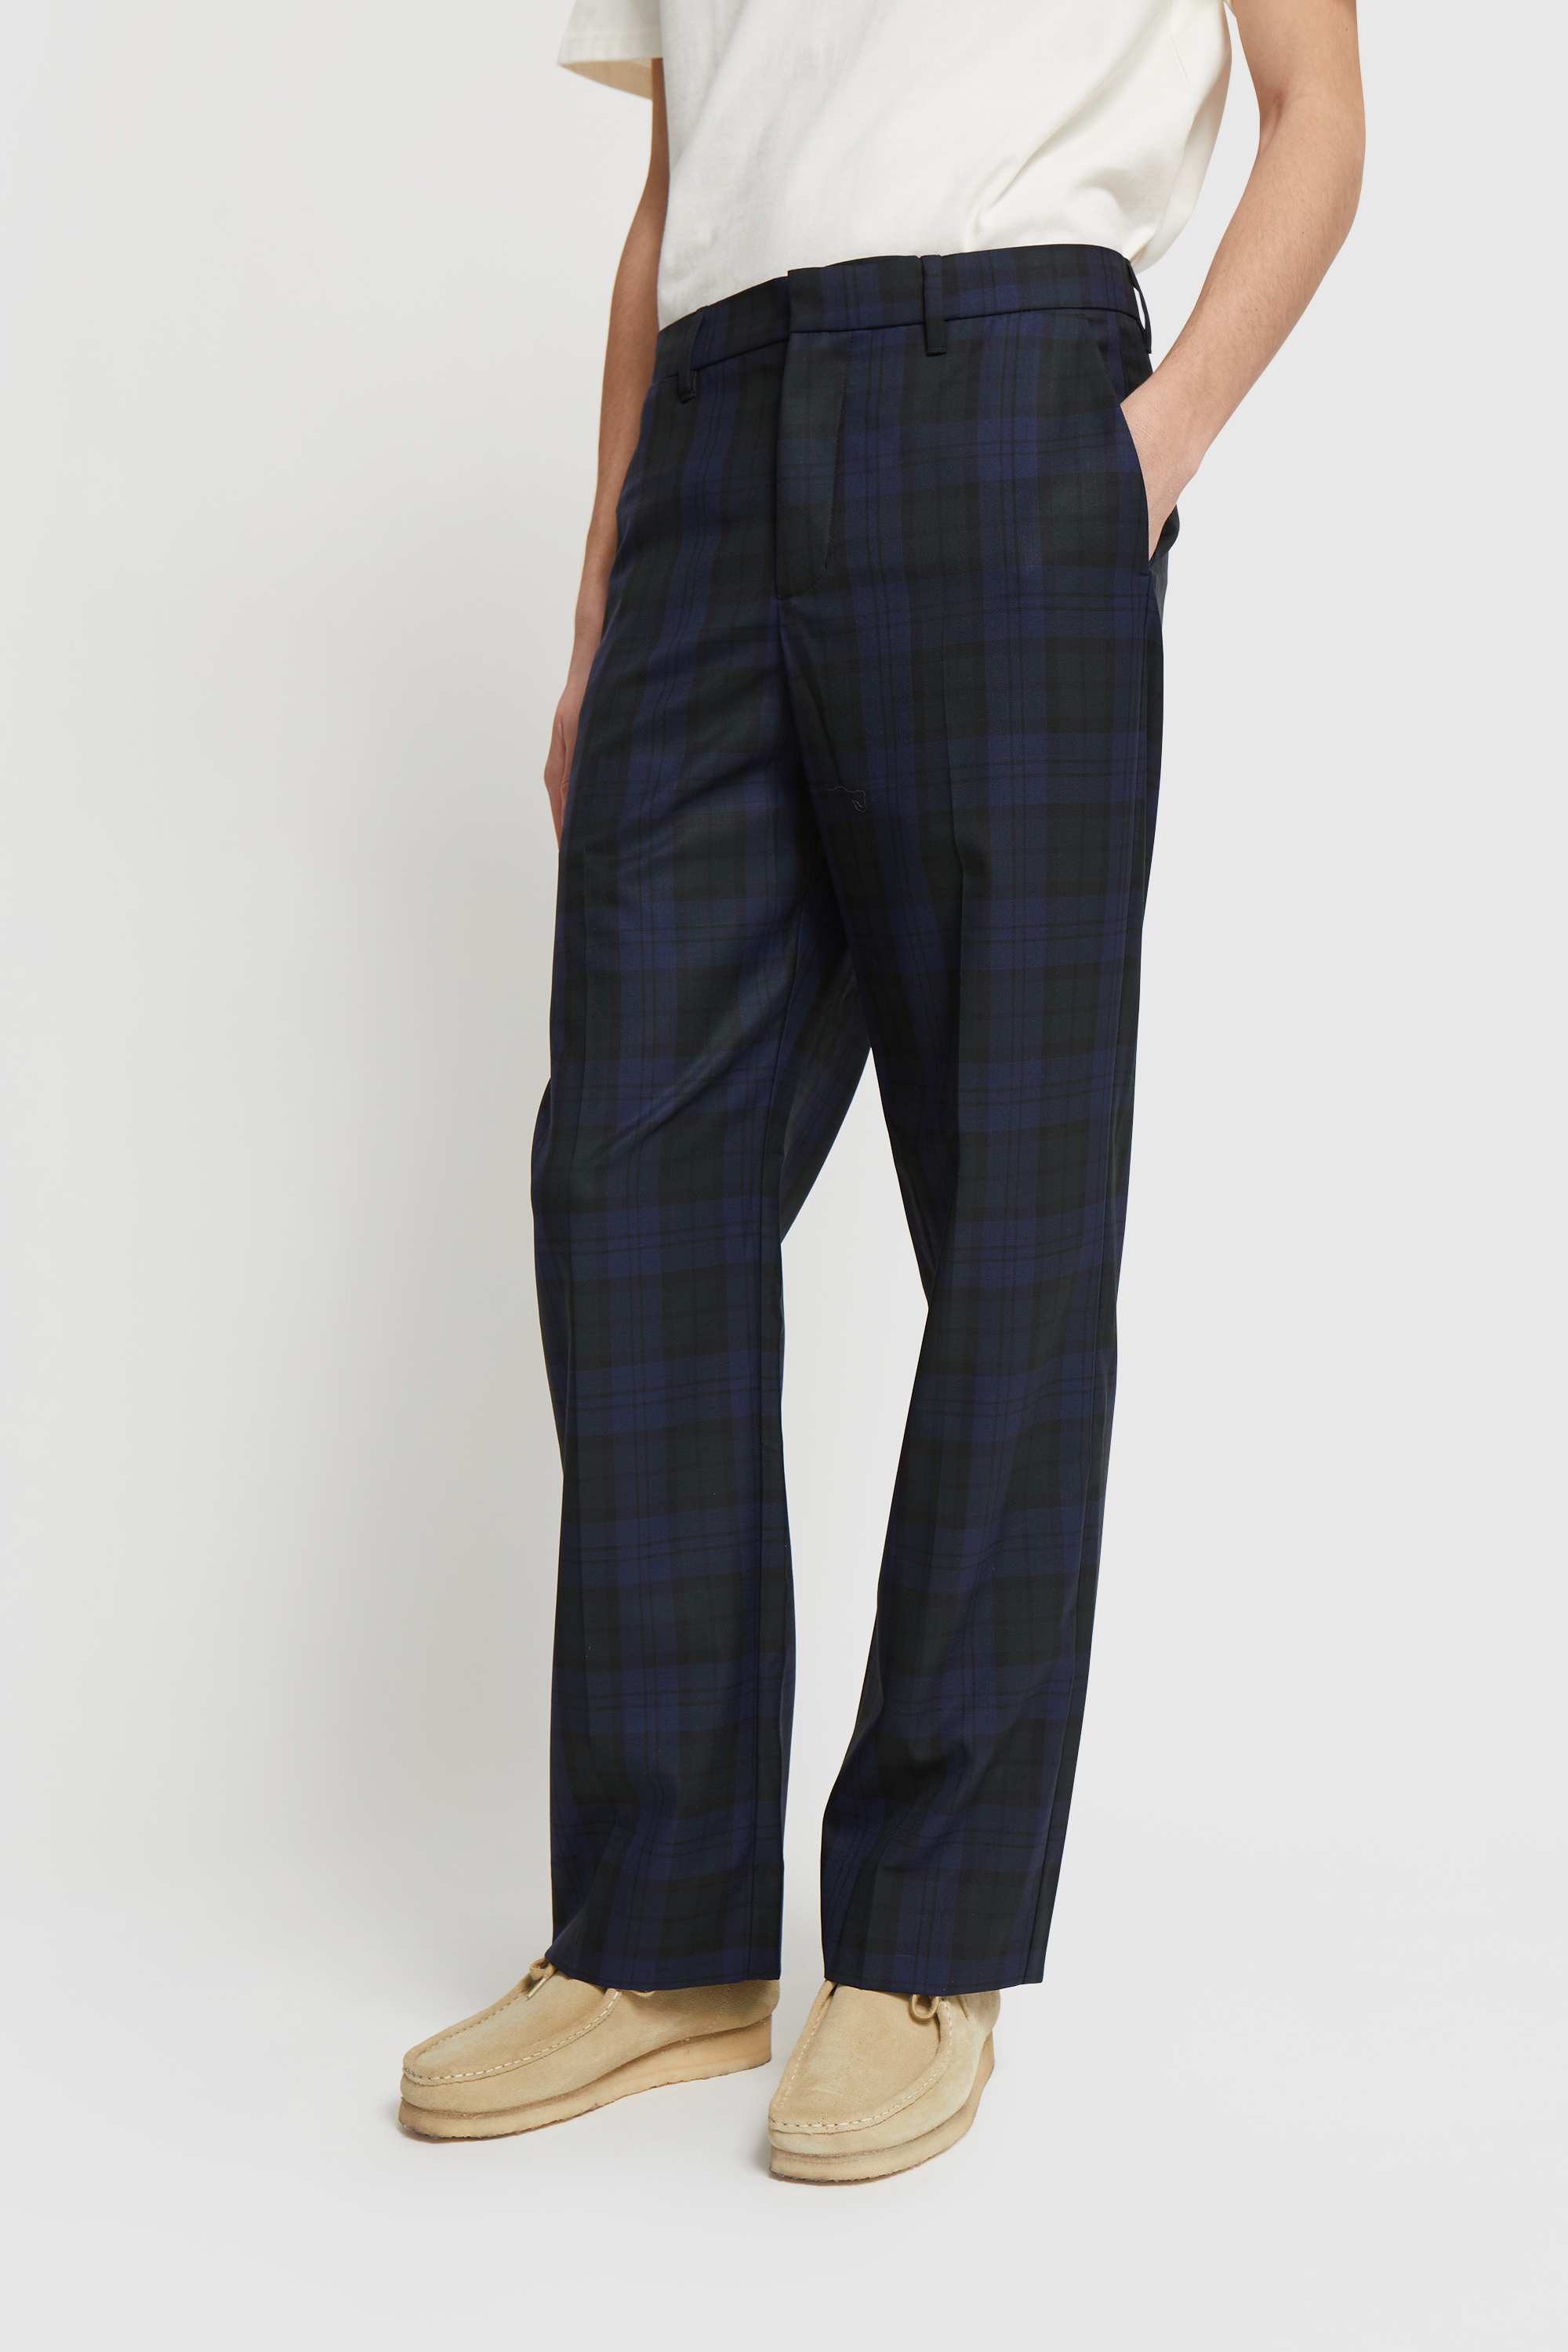 Wood Wood Surrey checked trousers Black Check | WoodWood.com